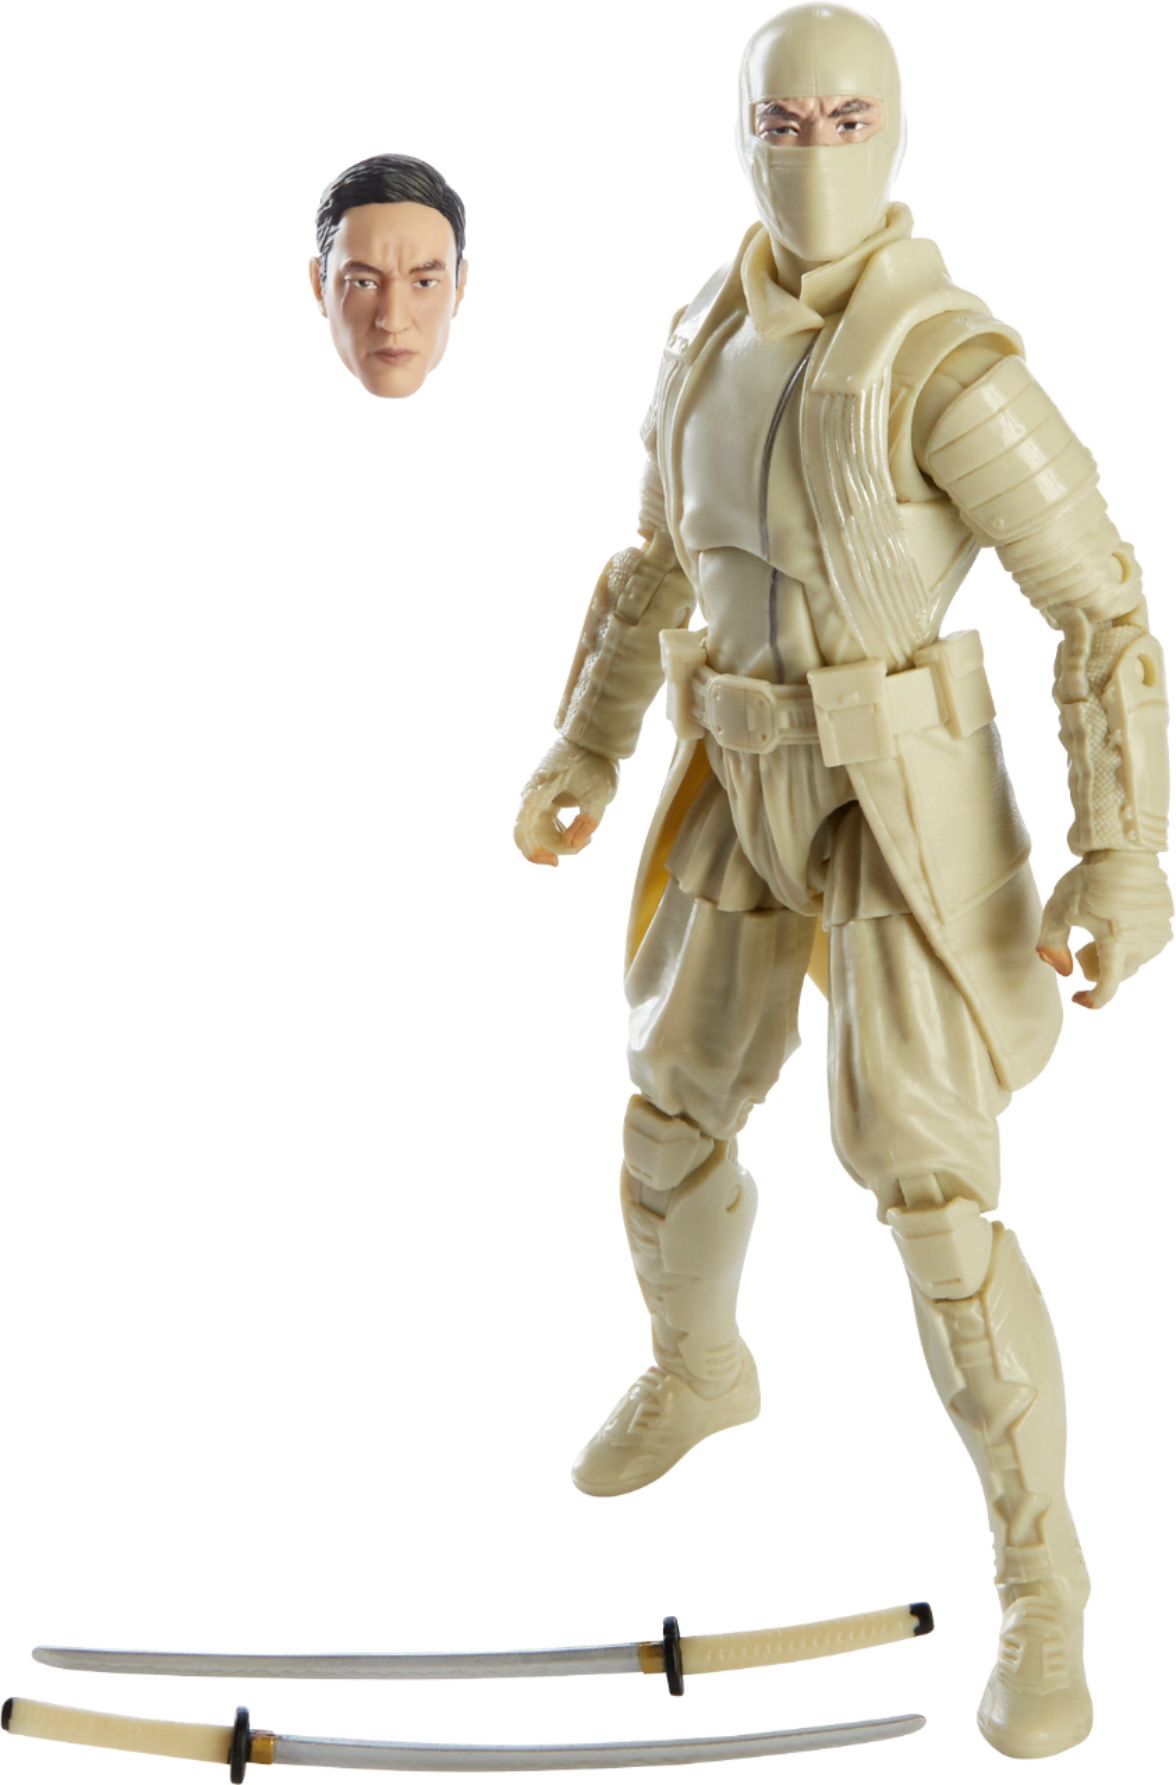 Hasbro Storm Shadow 3.75 inch Collectible with Accessories Action Figure for sale online